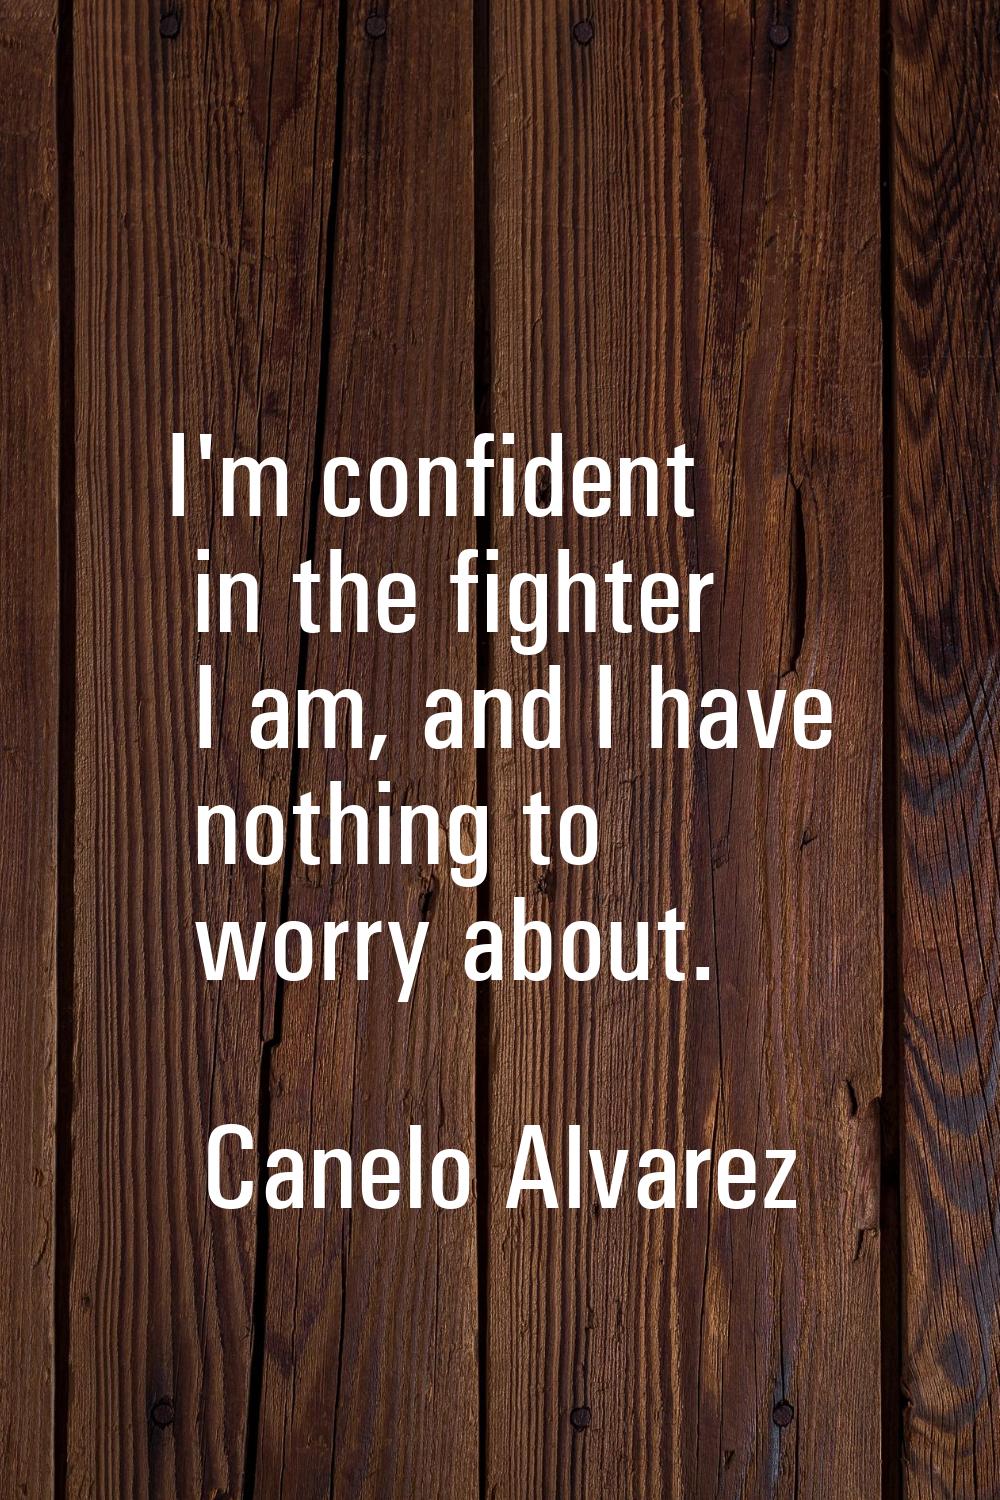 I'm confident in the fighter I am, and I have nothing to worry about.